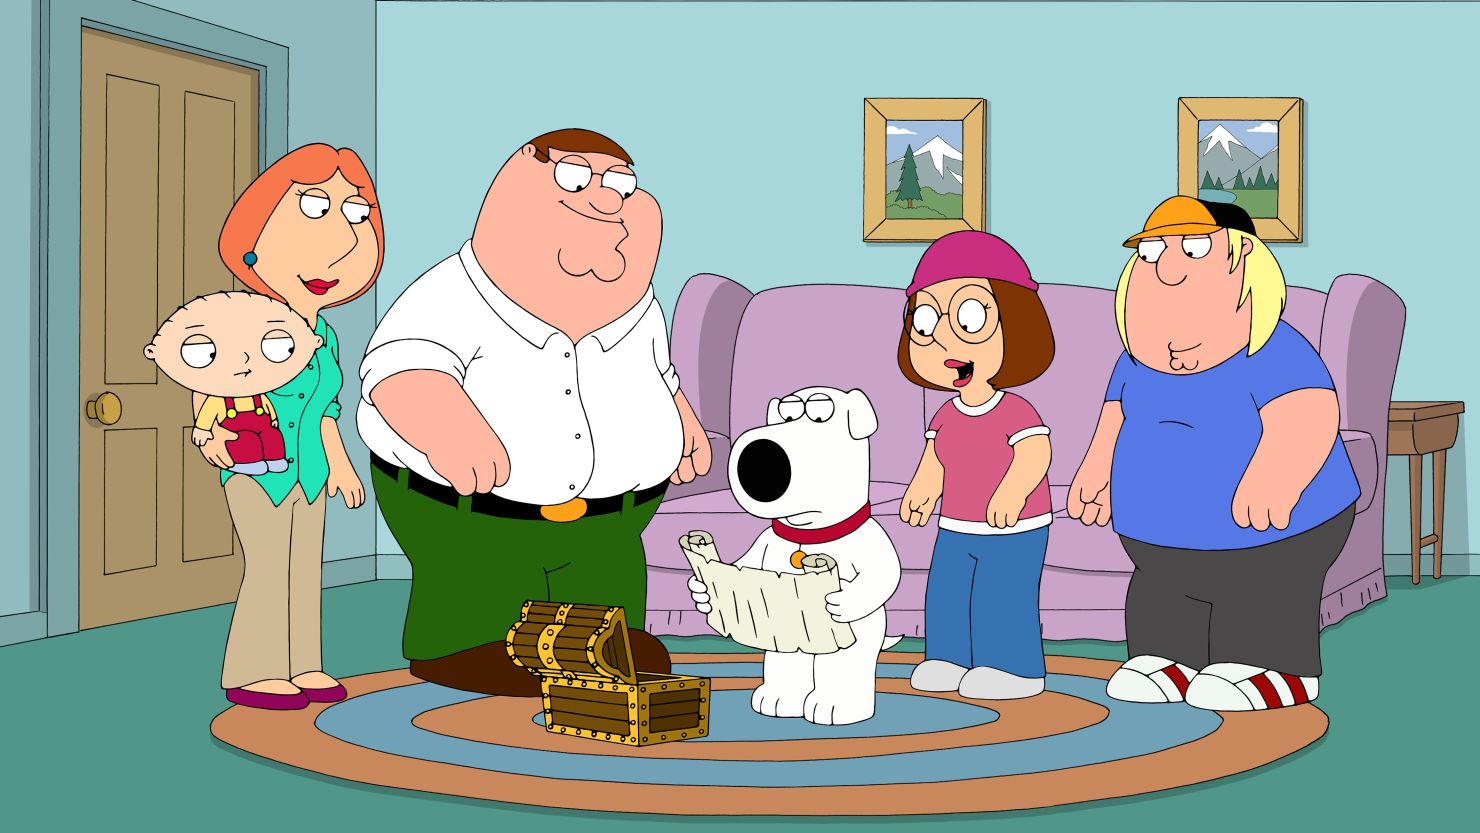  Fans were upset when Brian, the talking family dog, was killed off of the animated series "Family Guy."
